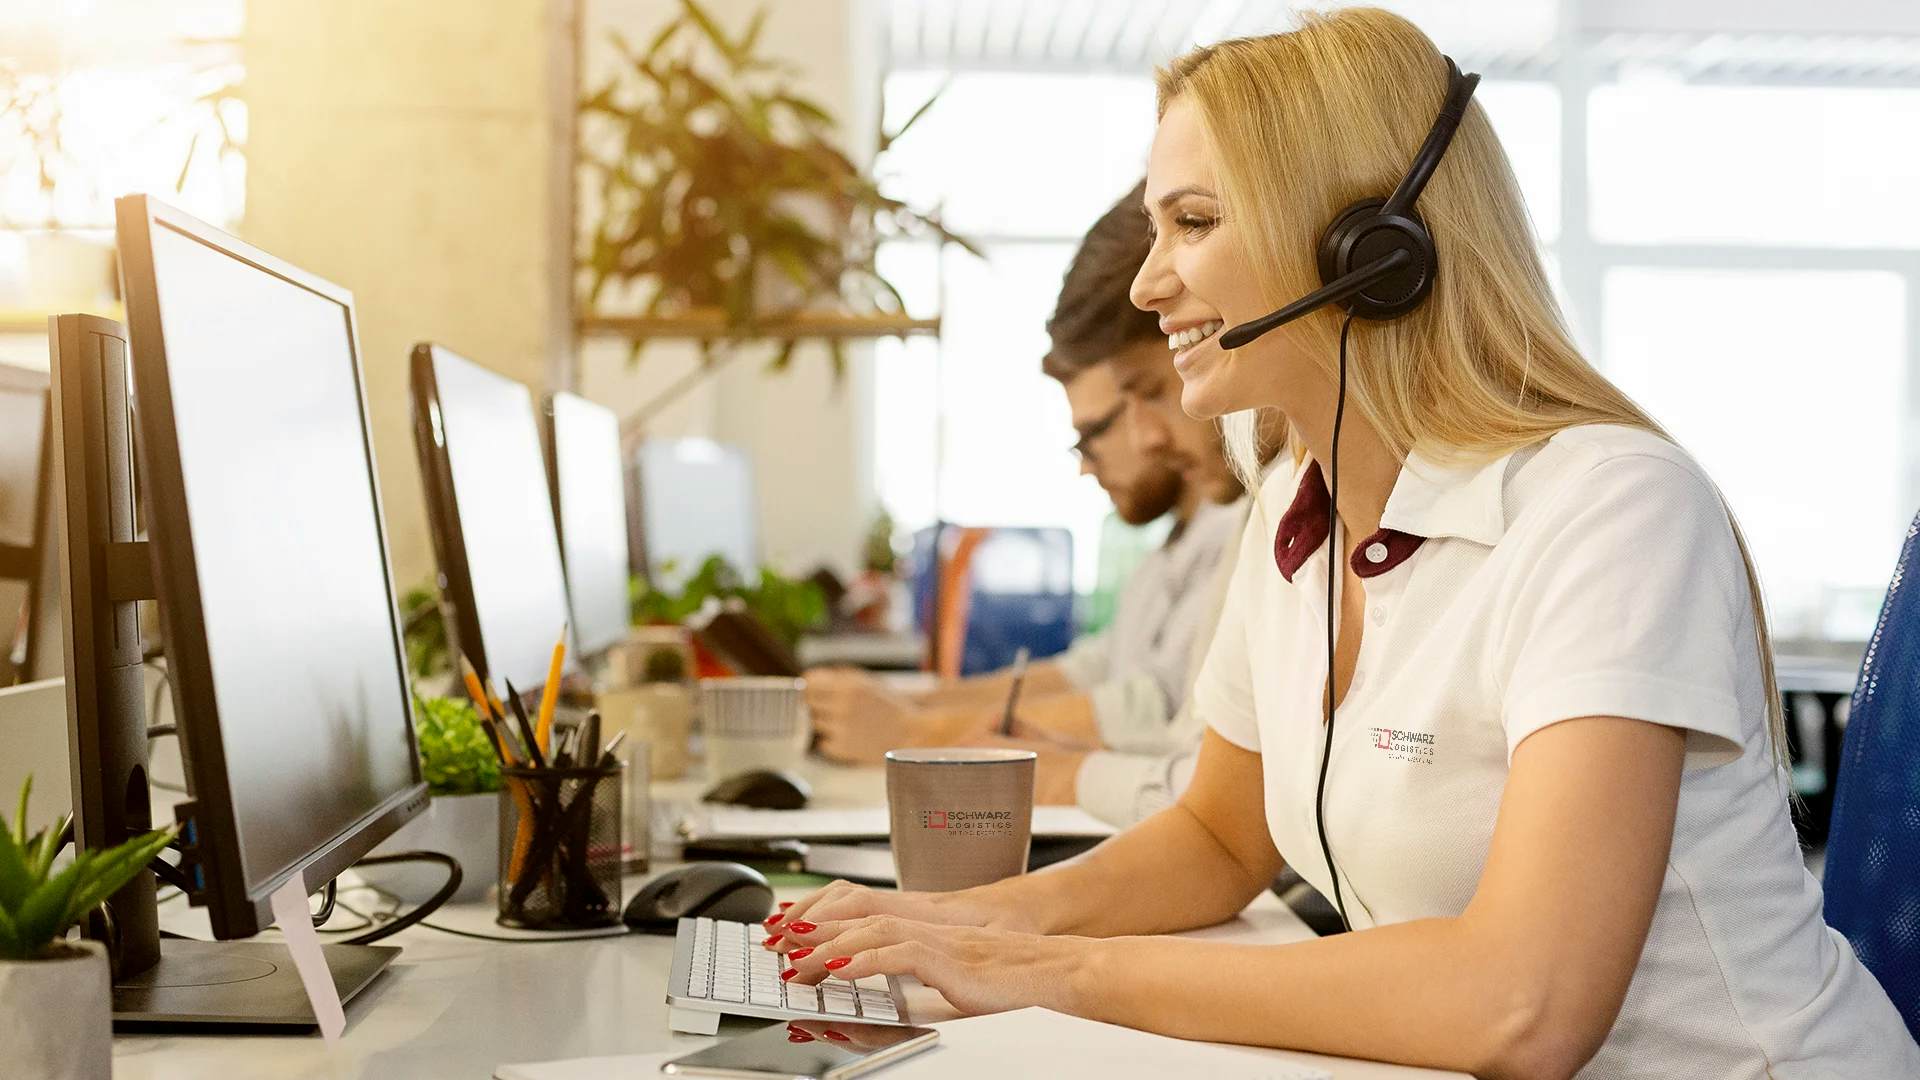 A smiling woman with a headset sits in an office environment, typing on a keyboard, indicative of a customer service representative. In the background, colleagues are also equipped with headsets and computers, focused on their work. The setting is bright with natural light, plants, and an atmosphere of professional engagement.